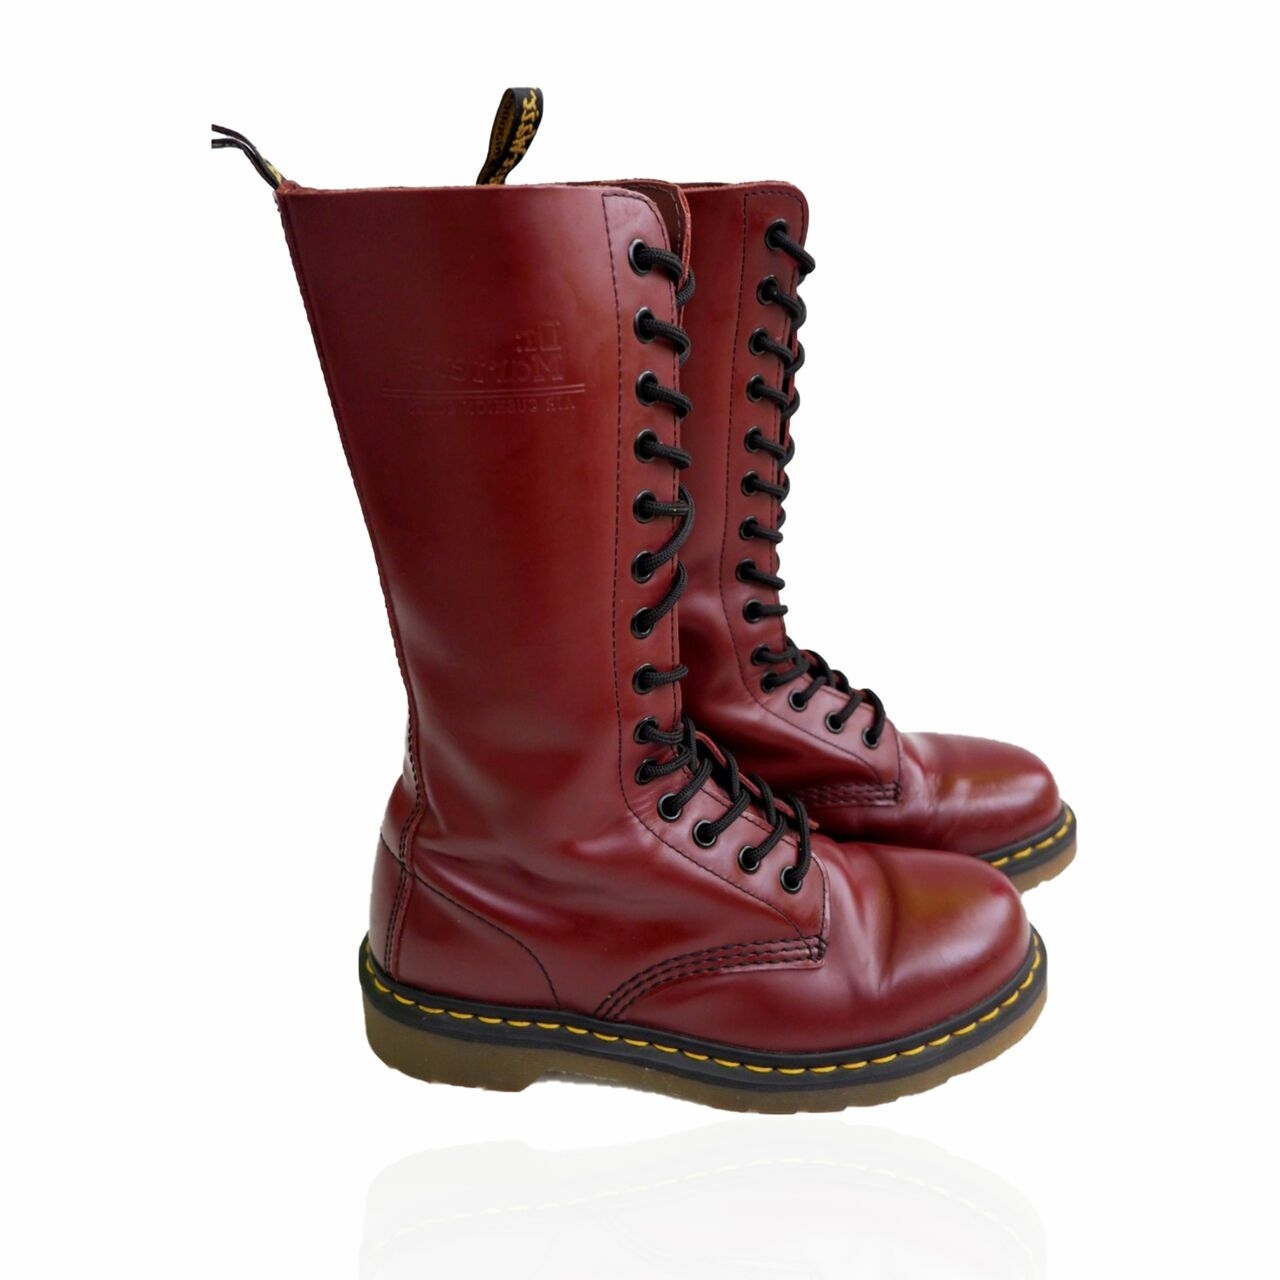 Dr. Martens Red Plaid Boots